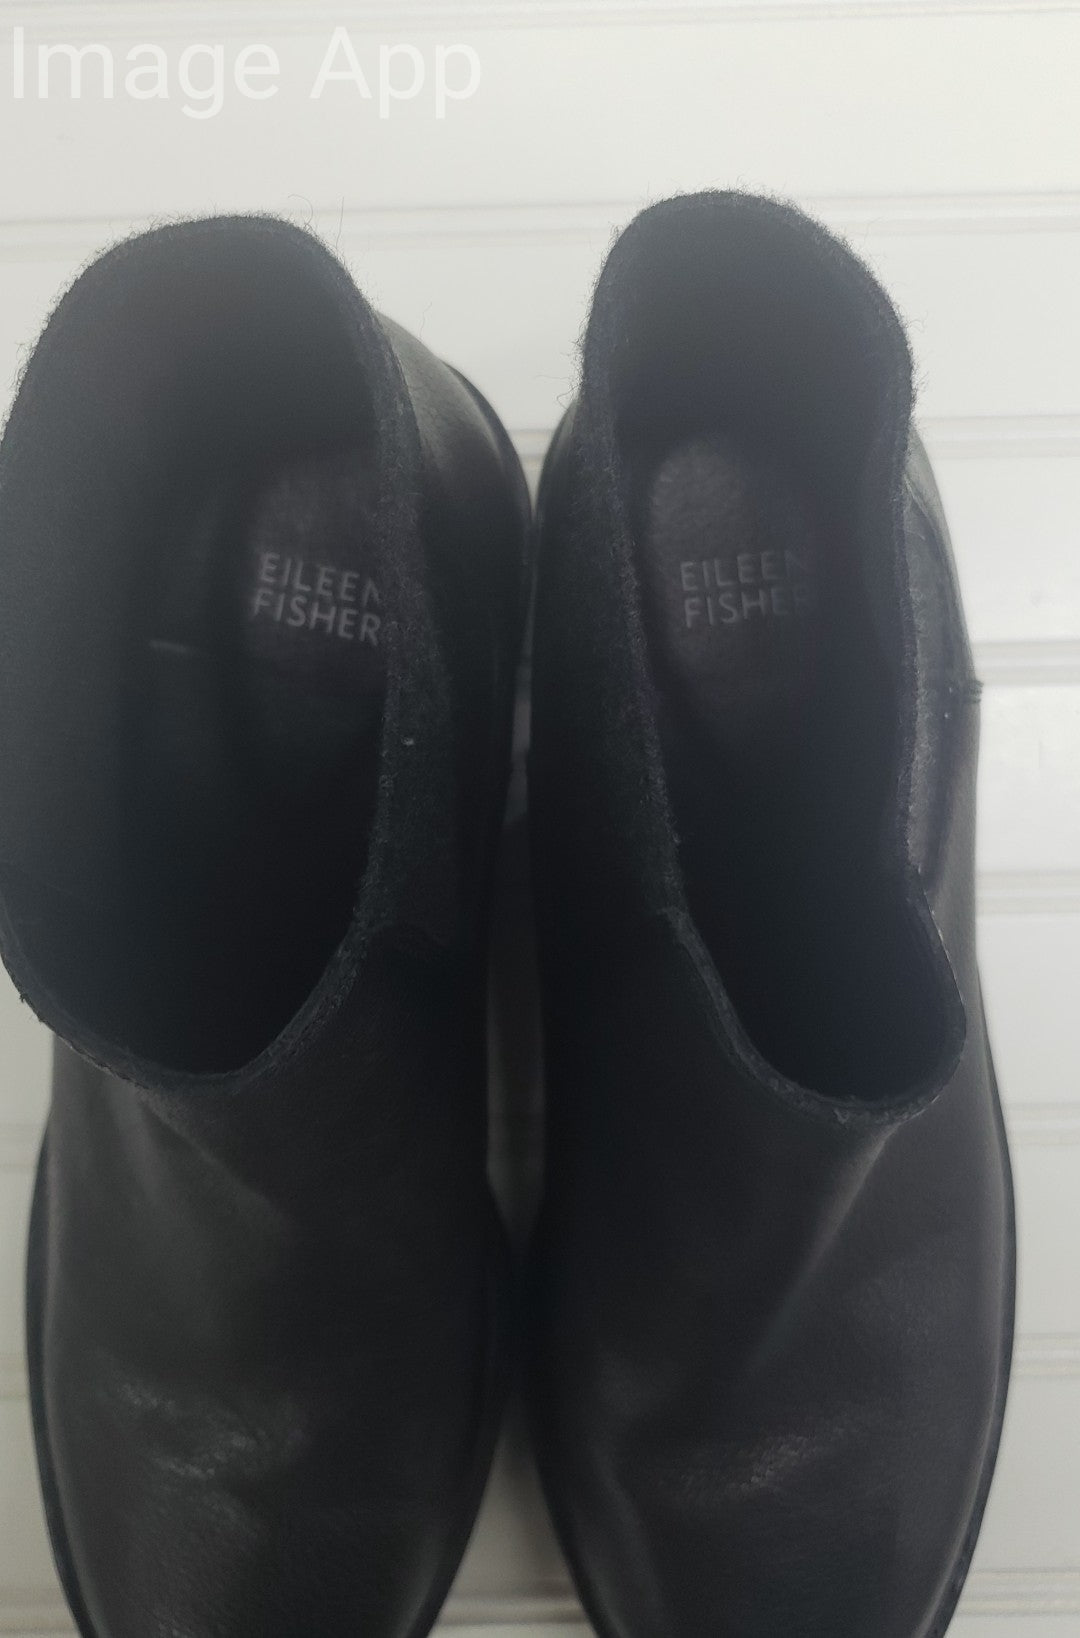 Eileen Fisher Chelsea Boot Size 9.5 1E